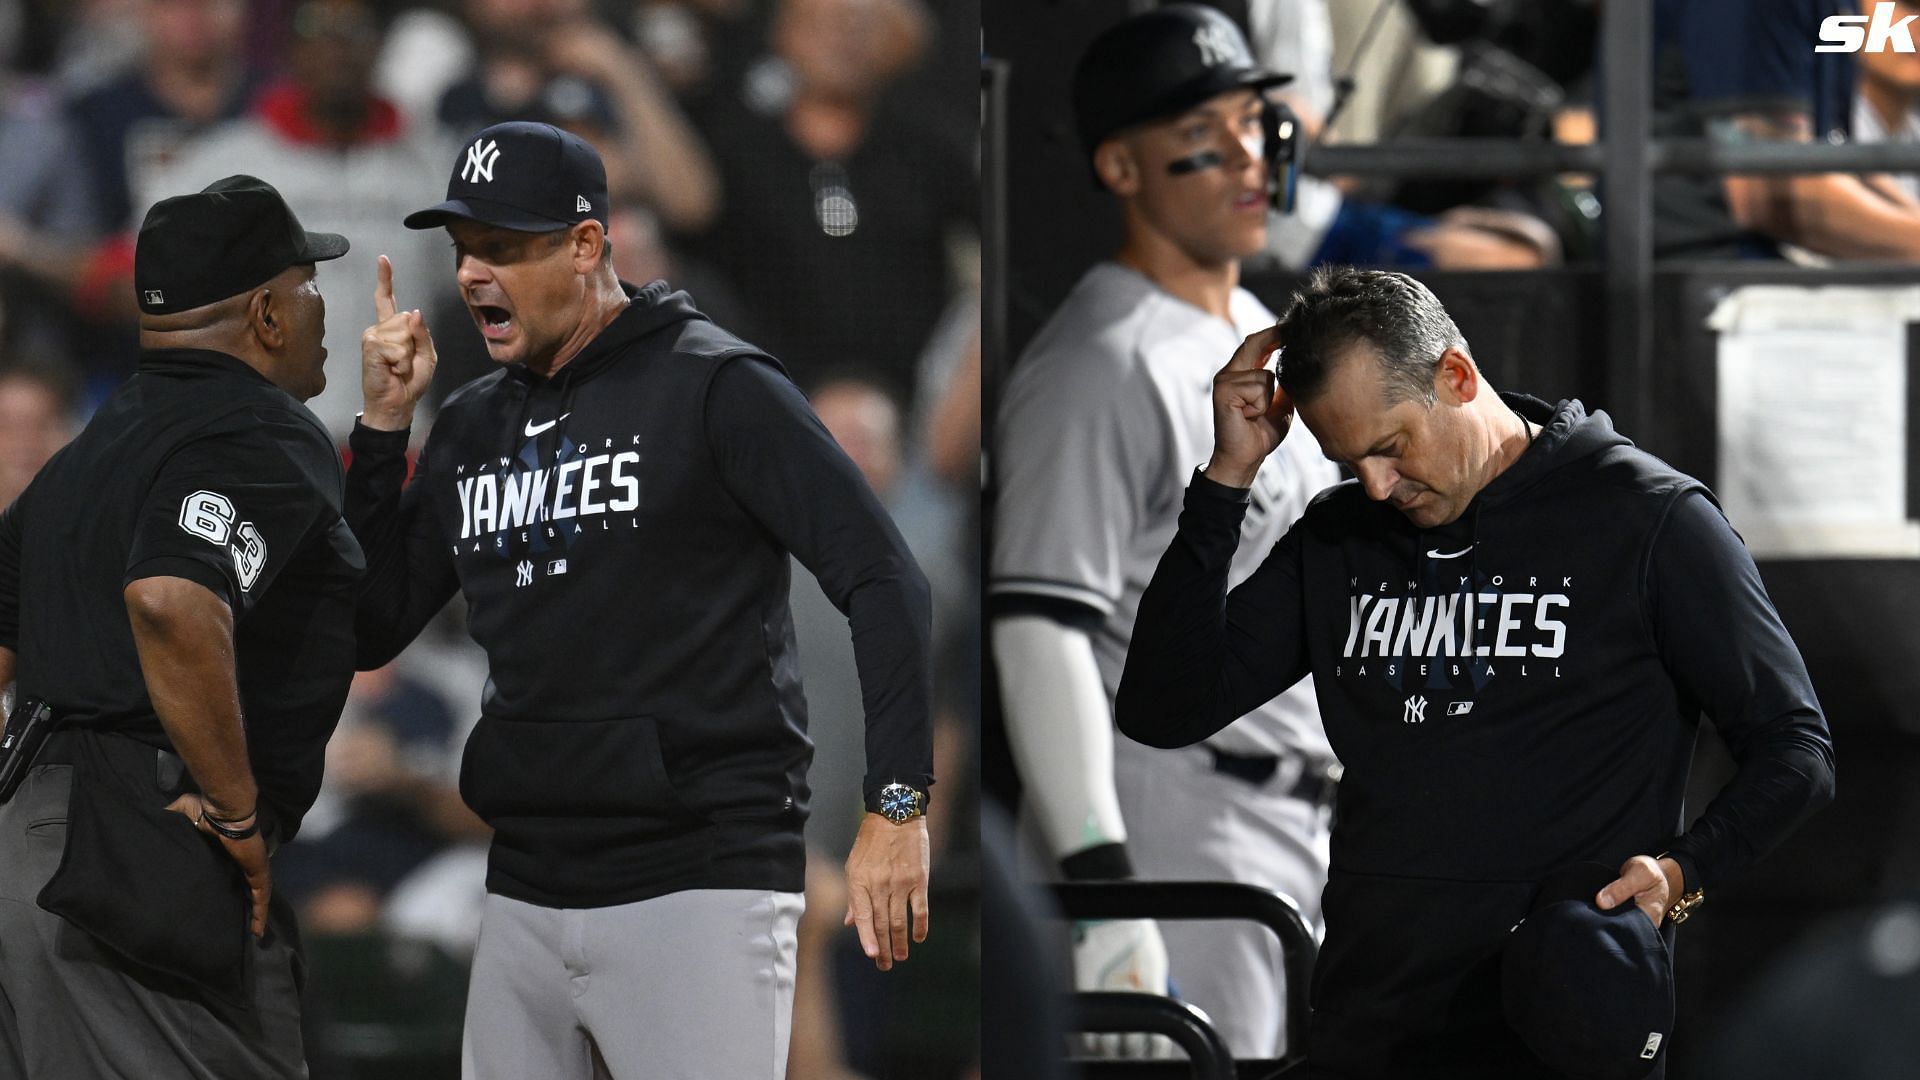 Manager Aaron Boone of the New York Yankees leaves the game after being ejected by home umpire Laz Diaz in the eighth inning against the Chicago White Sox